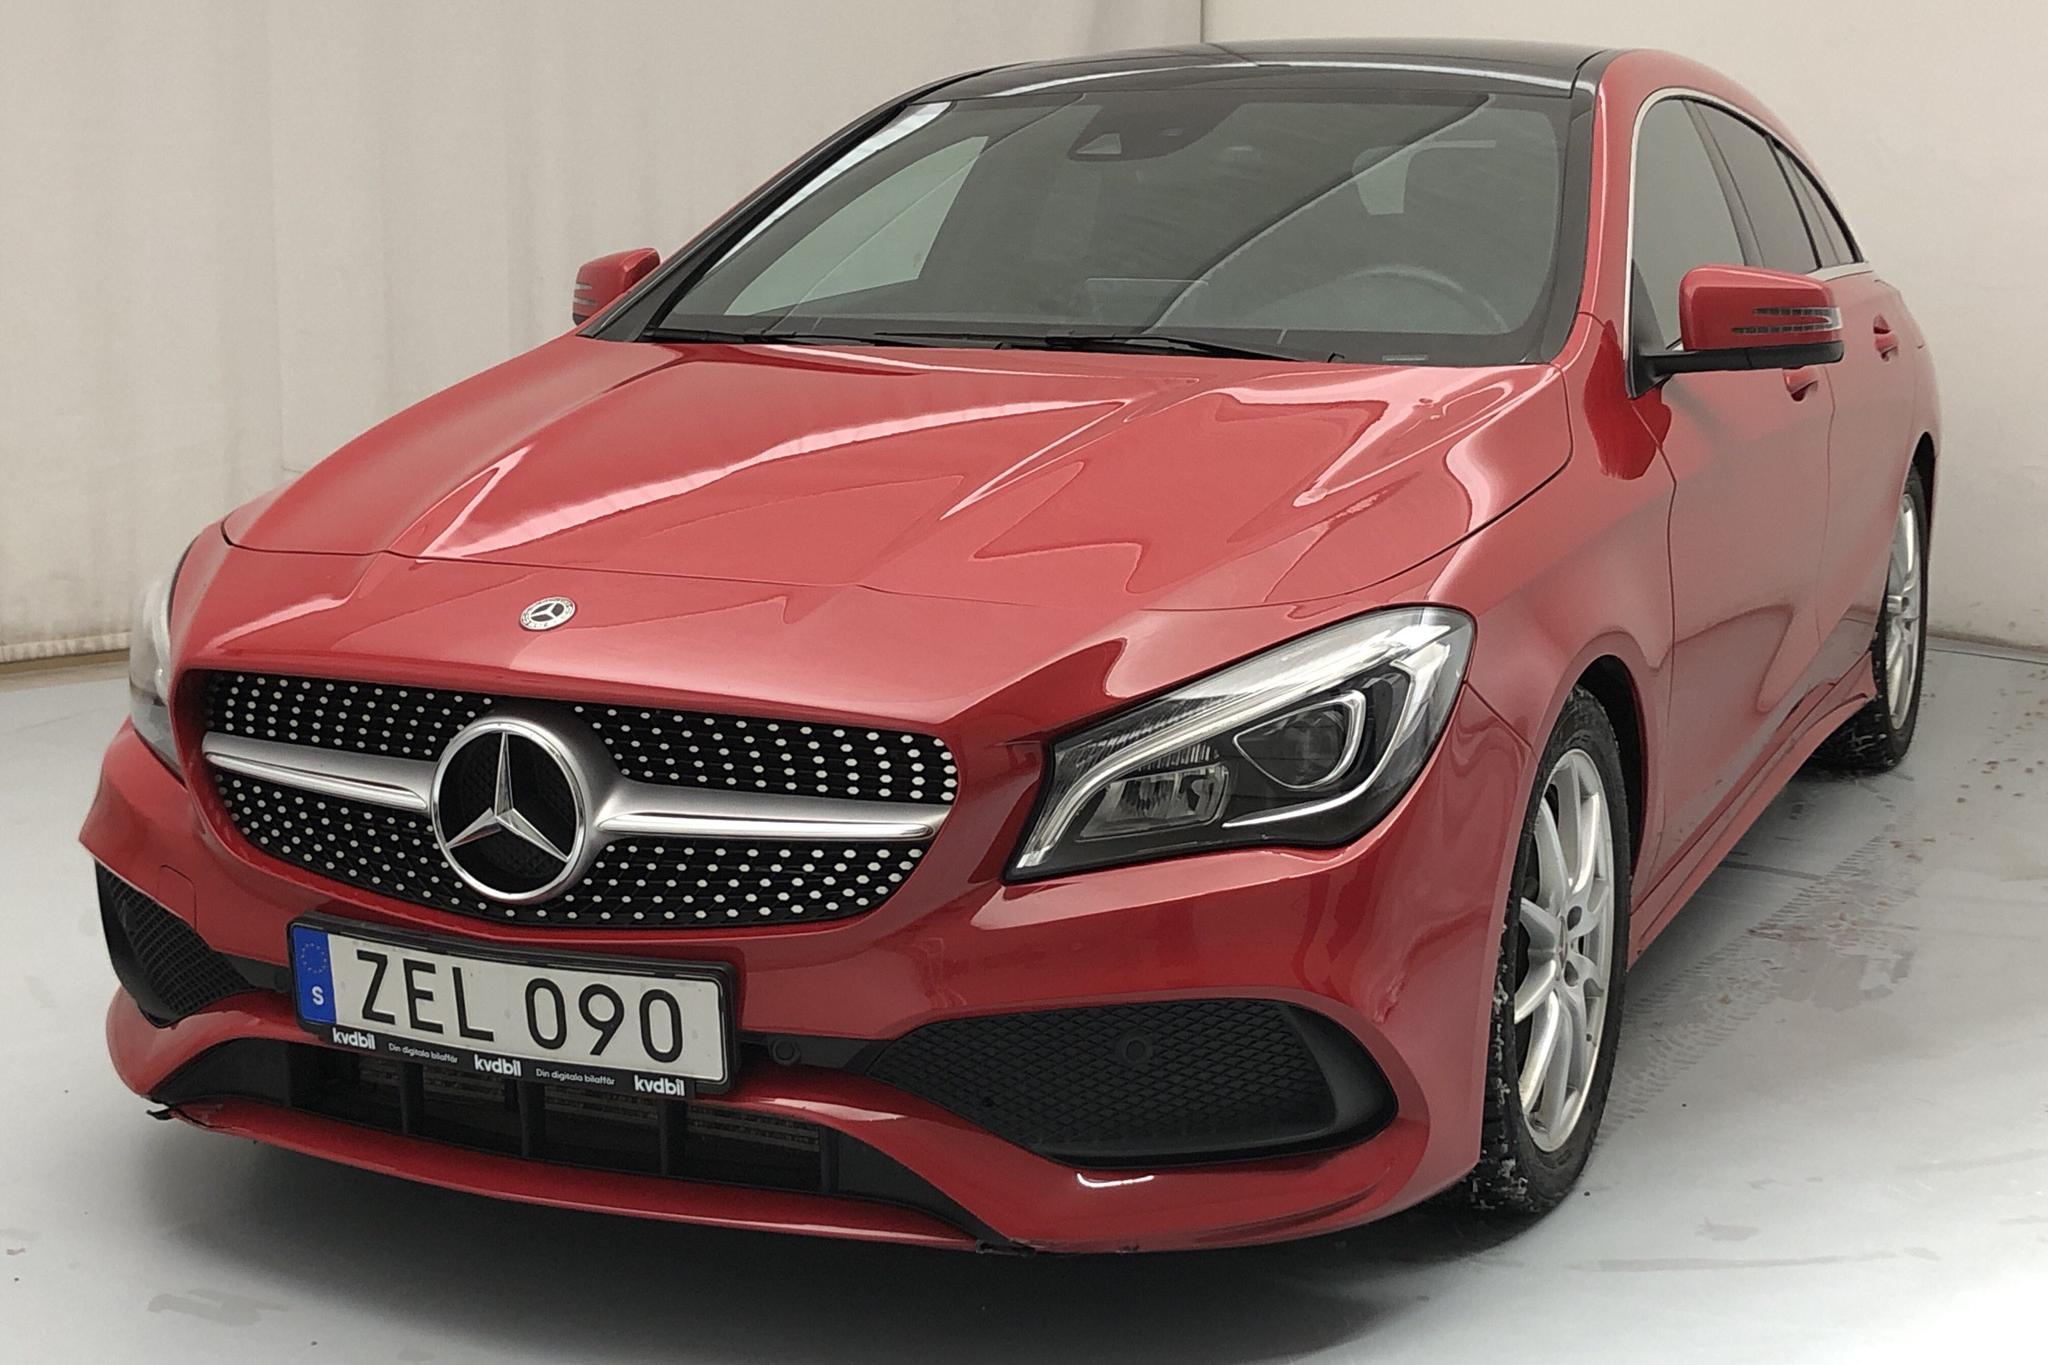 Mercedes CLA 220 d 4MATIC Shooting Brake X117 (177hk) - 84 570 km - Automatic - red - 2018